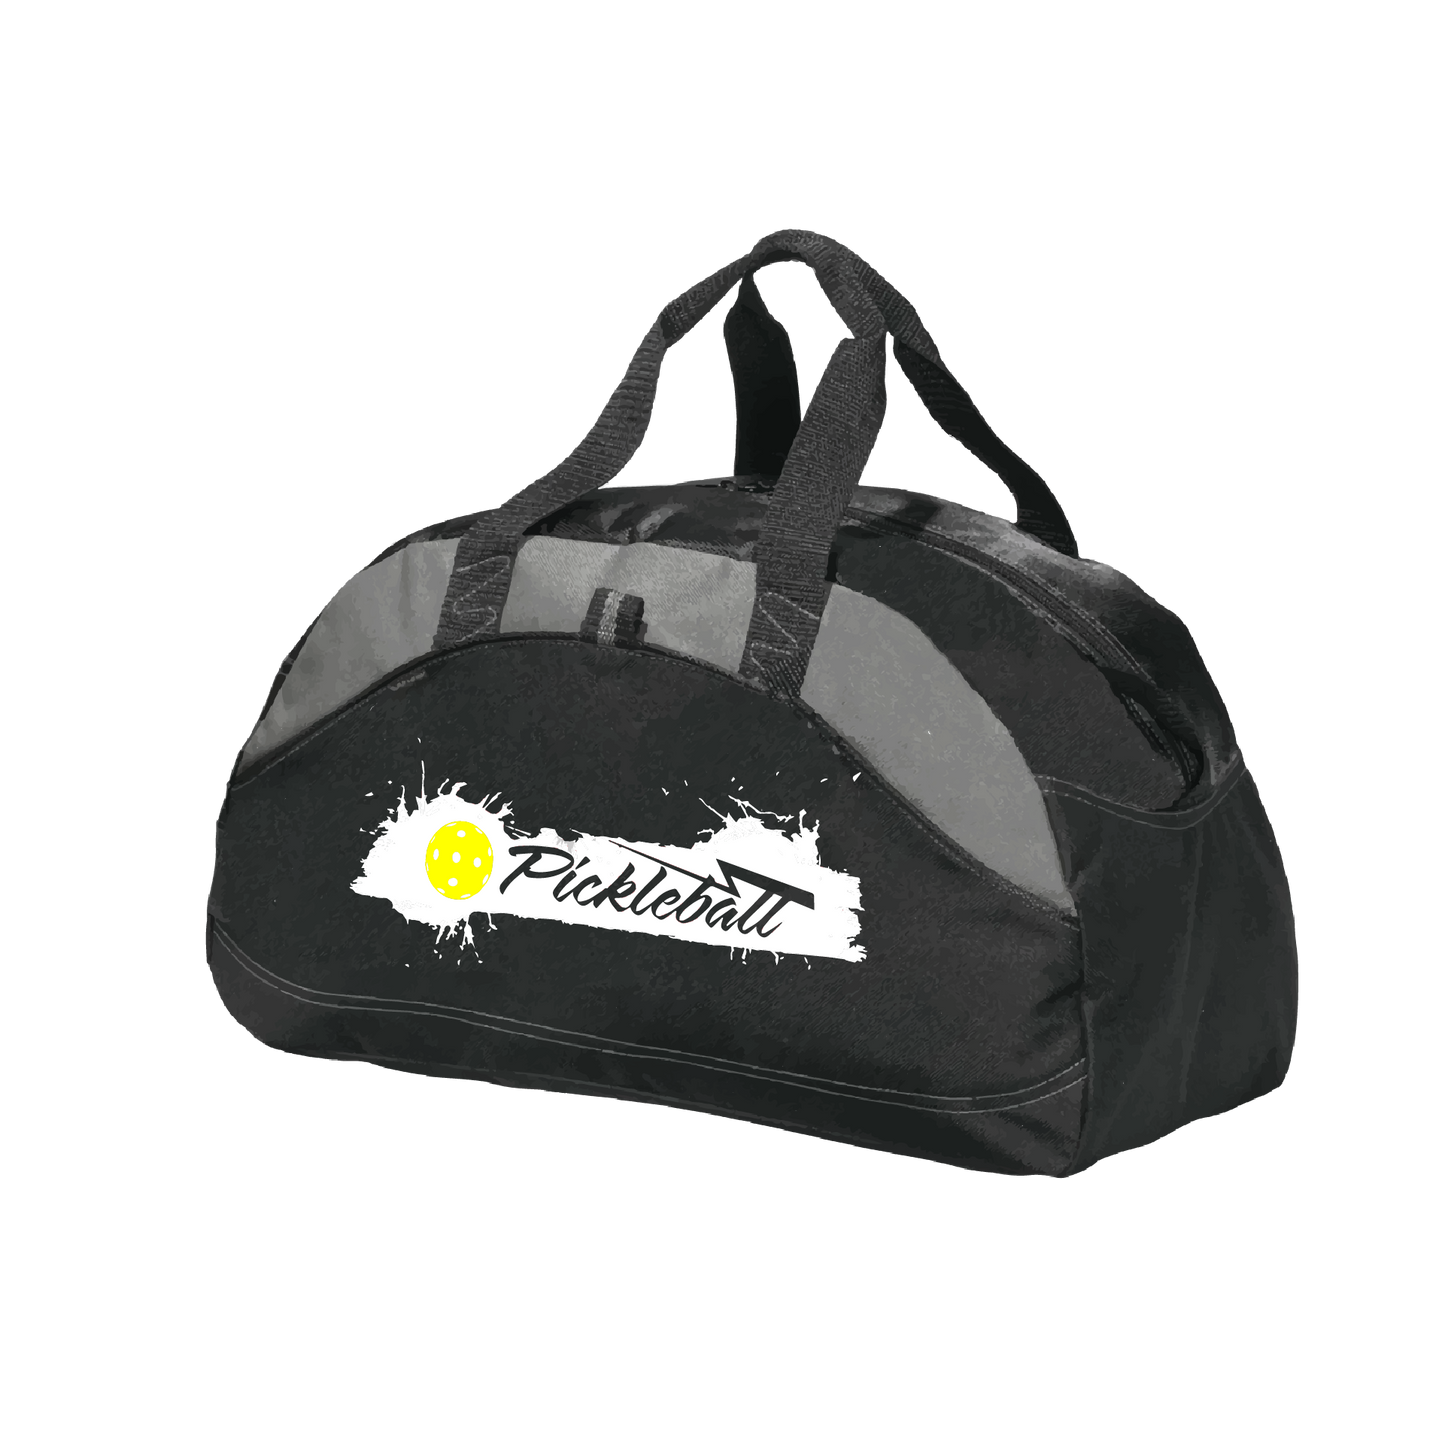 Pickleball Design: Extreme  Carry your gear in comfort and style. This fun pickleball duffel bag is the perfect accessory for all pickleball players needing to keep their gear in one place. This medium sized duffel tote is ideal for all your pickleball activities. The large center compartment allows for plenty of space and the mesh end pocket is perfect for holding a water bottle. Duffel bag comes with an adjustable shoulder strap and the polyester material is durable and easily cleaned.